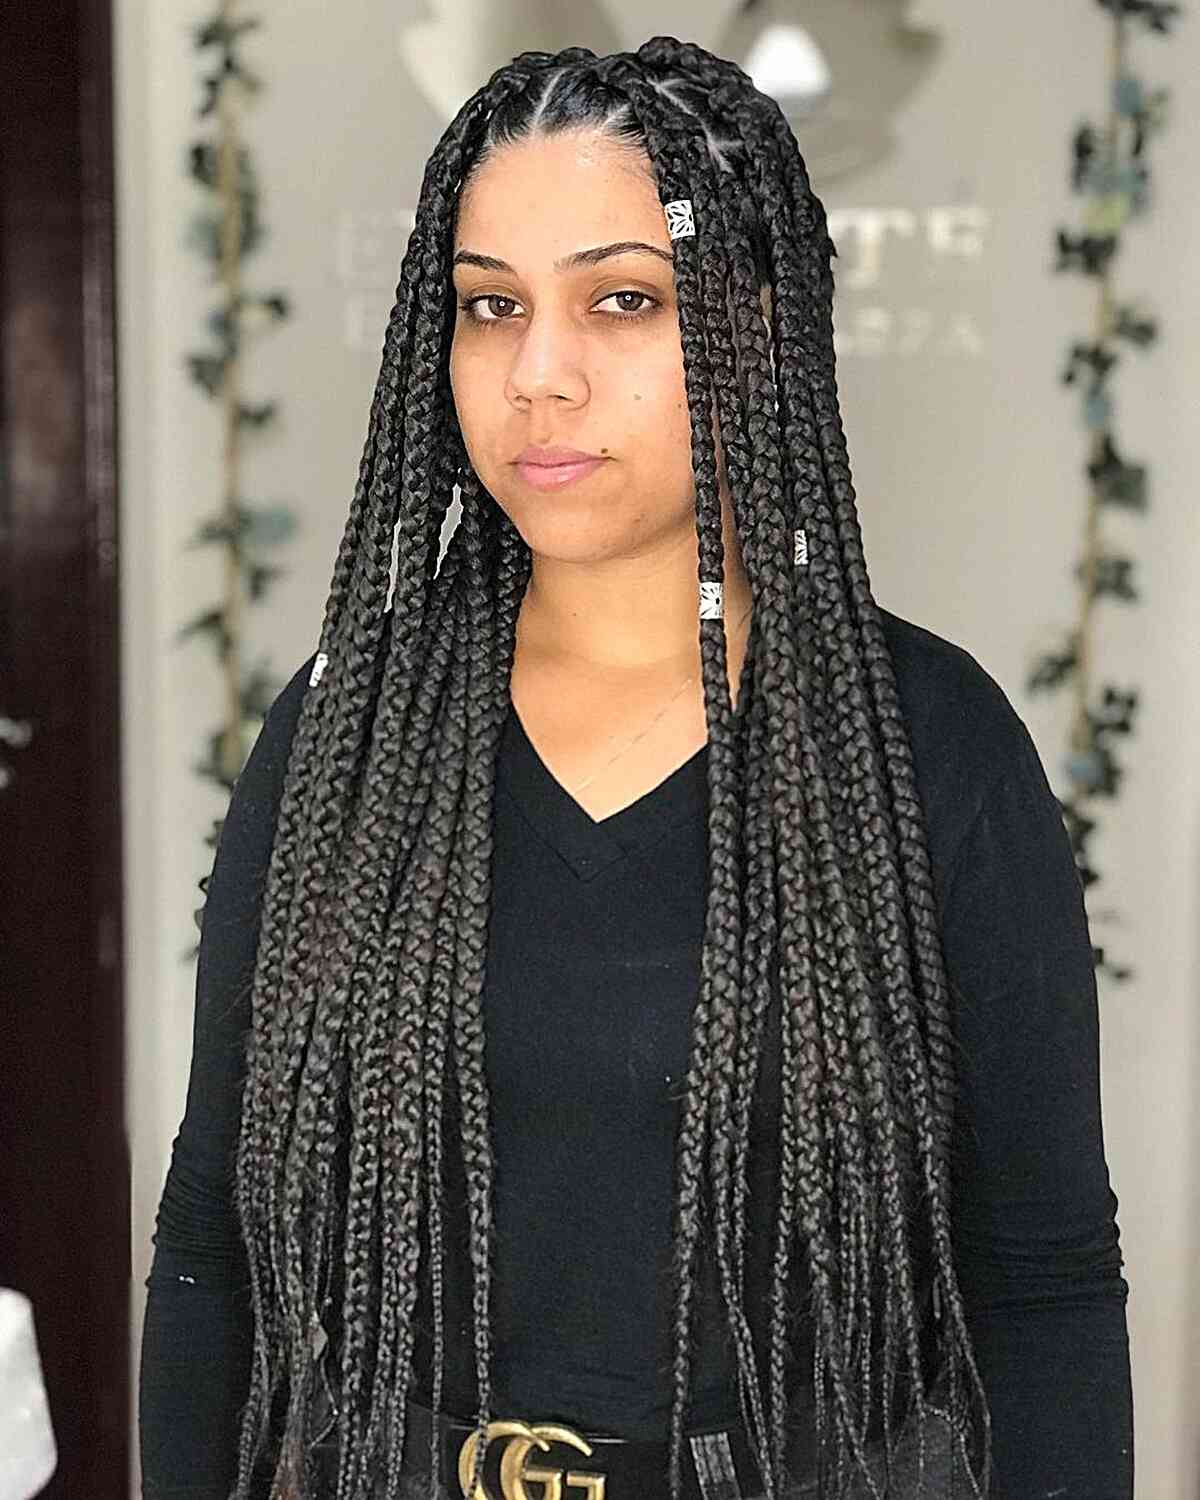 Long Poetic Justice Braids with Cuffs